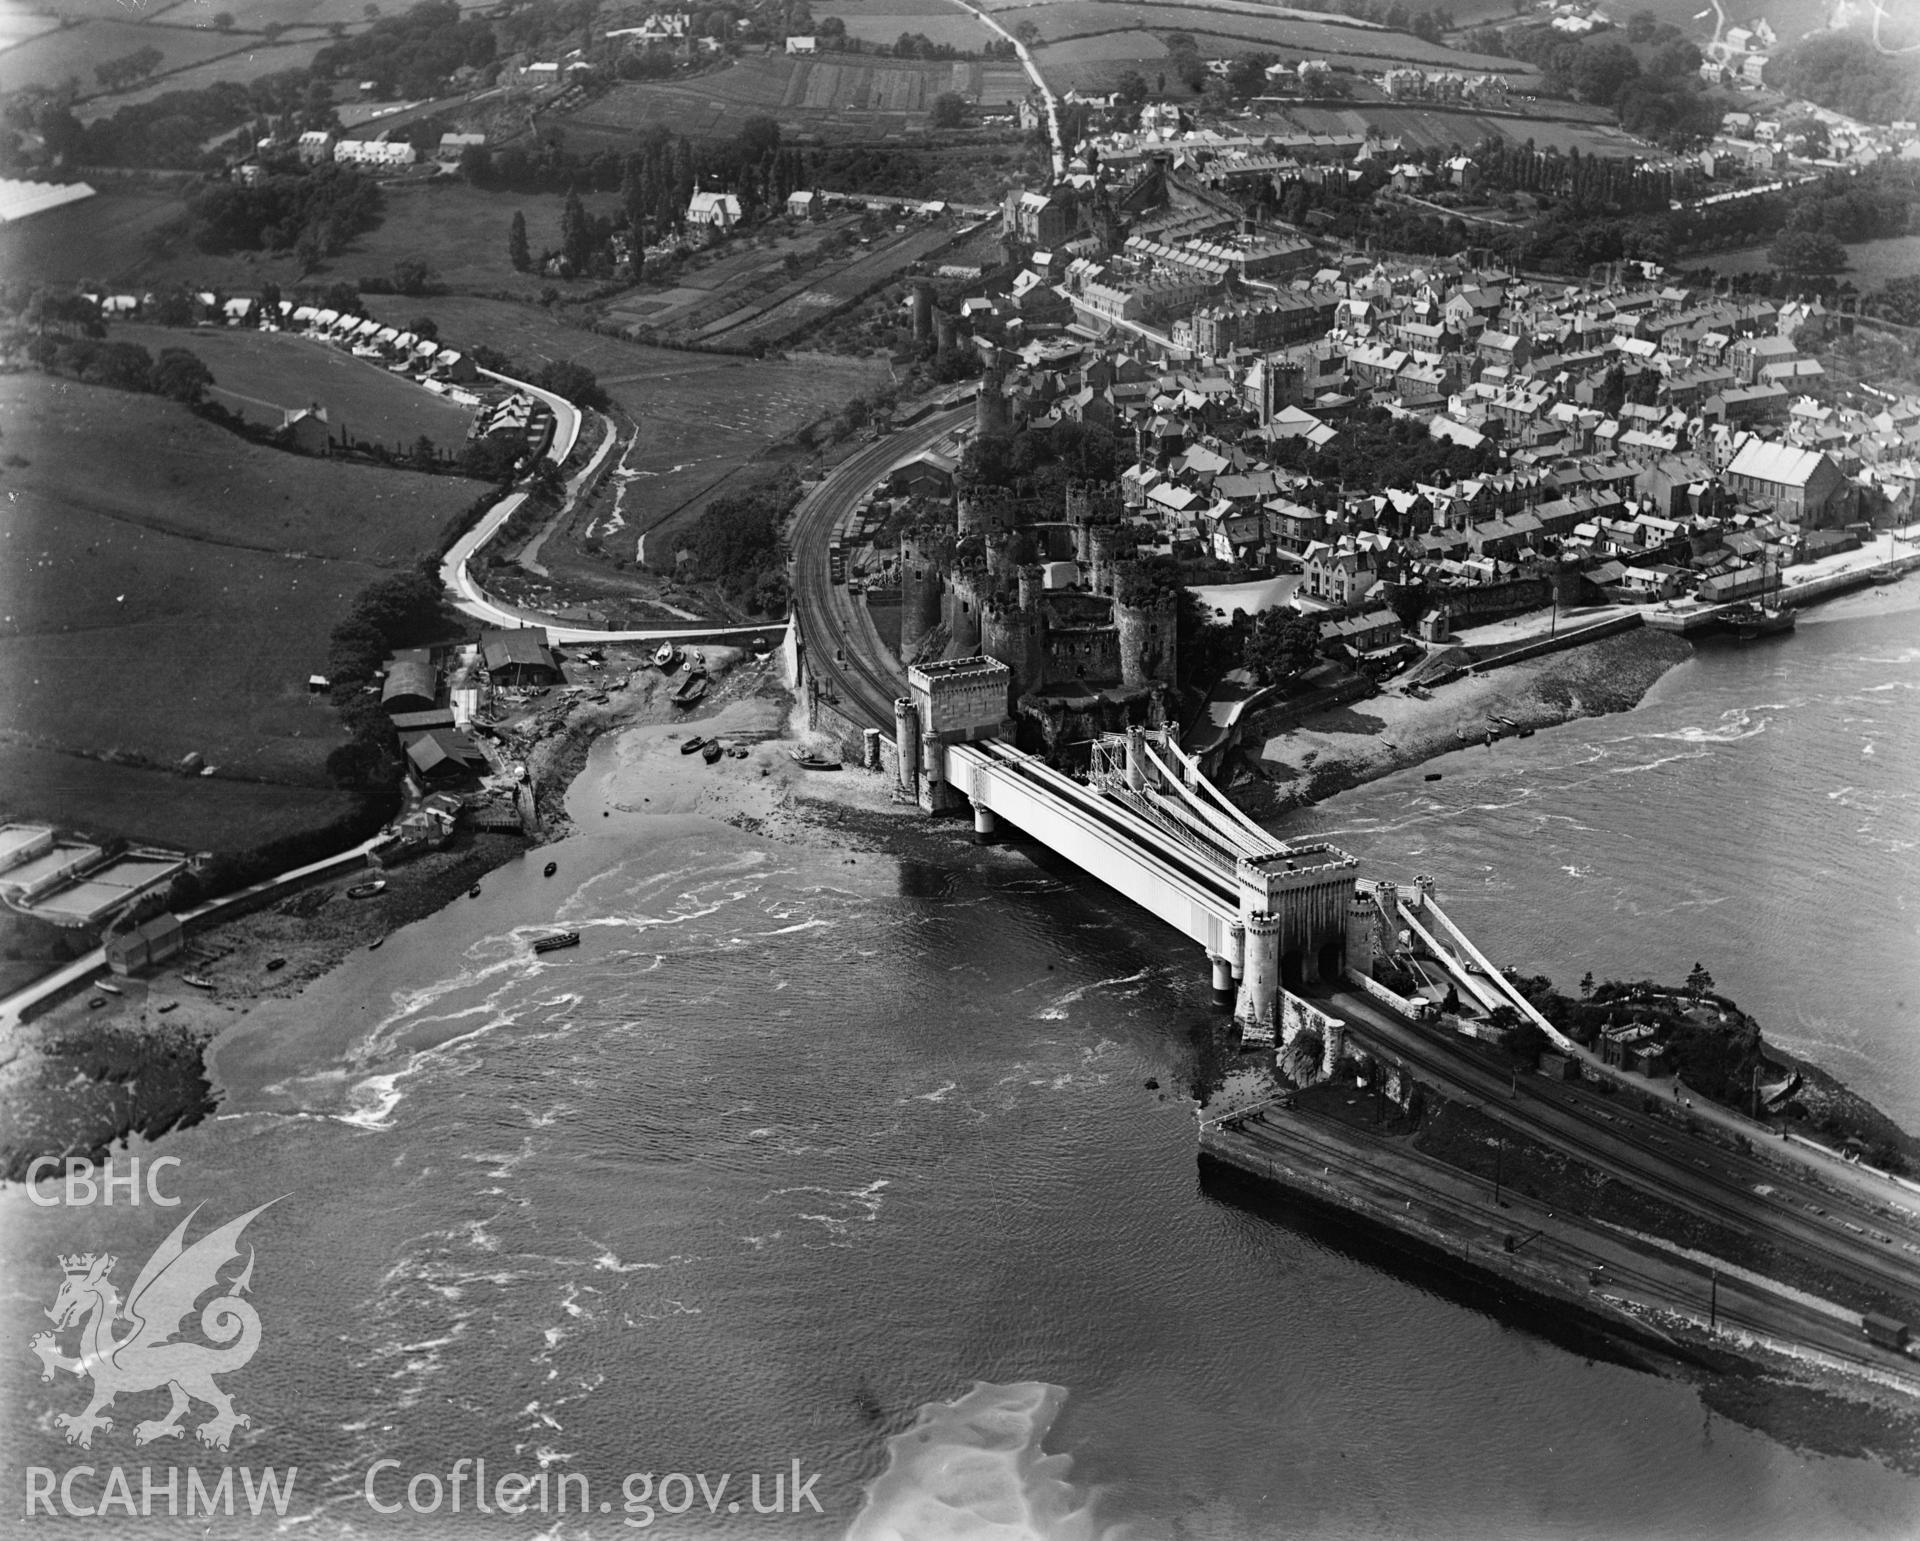 View of Conwy showing bridges, oblique aerial view. 5?x4? black and white glass plate negative.